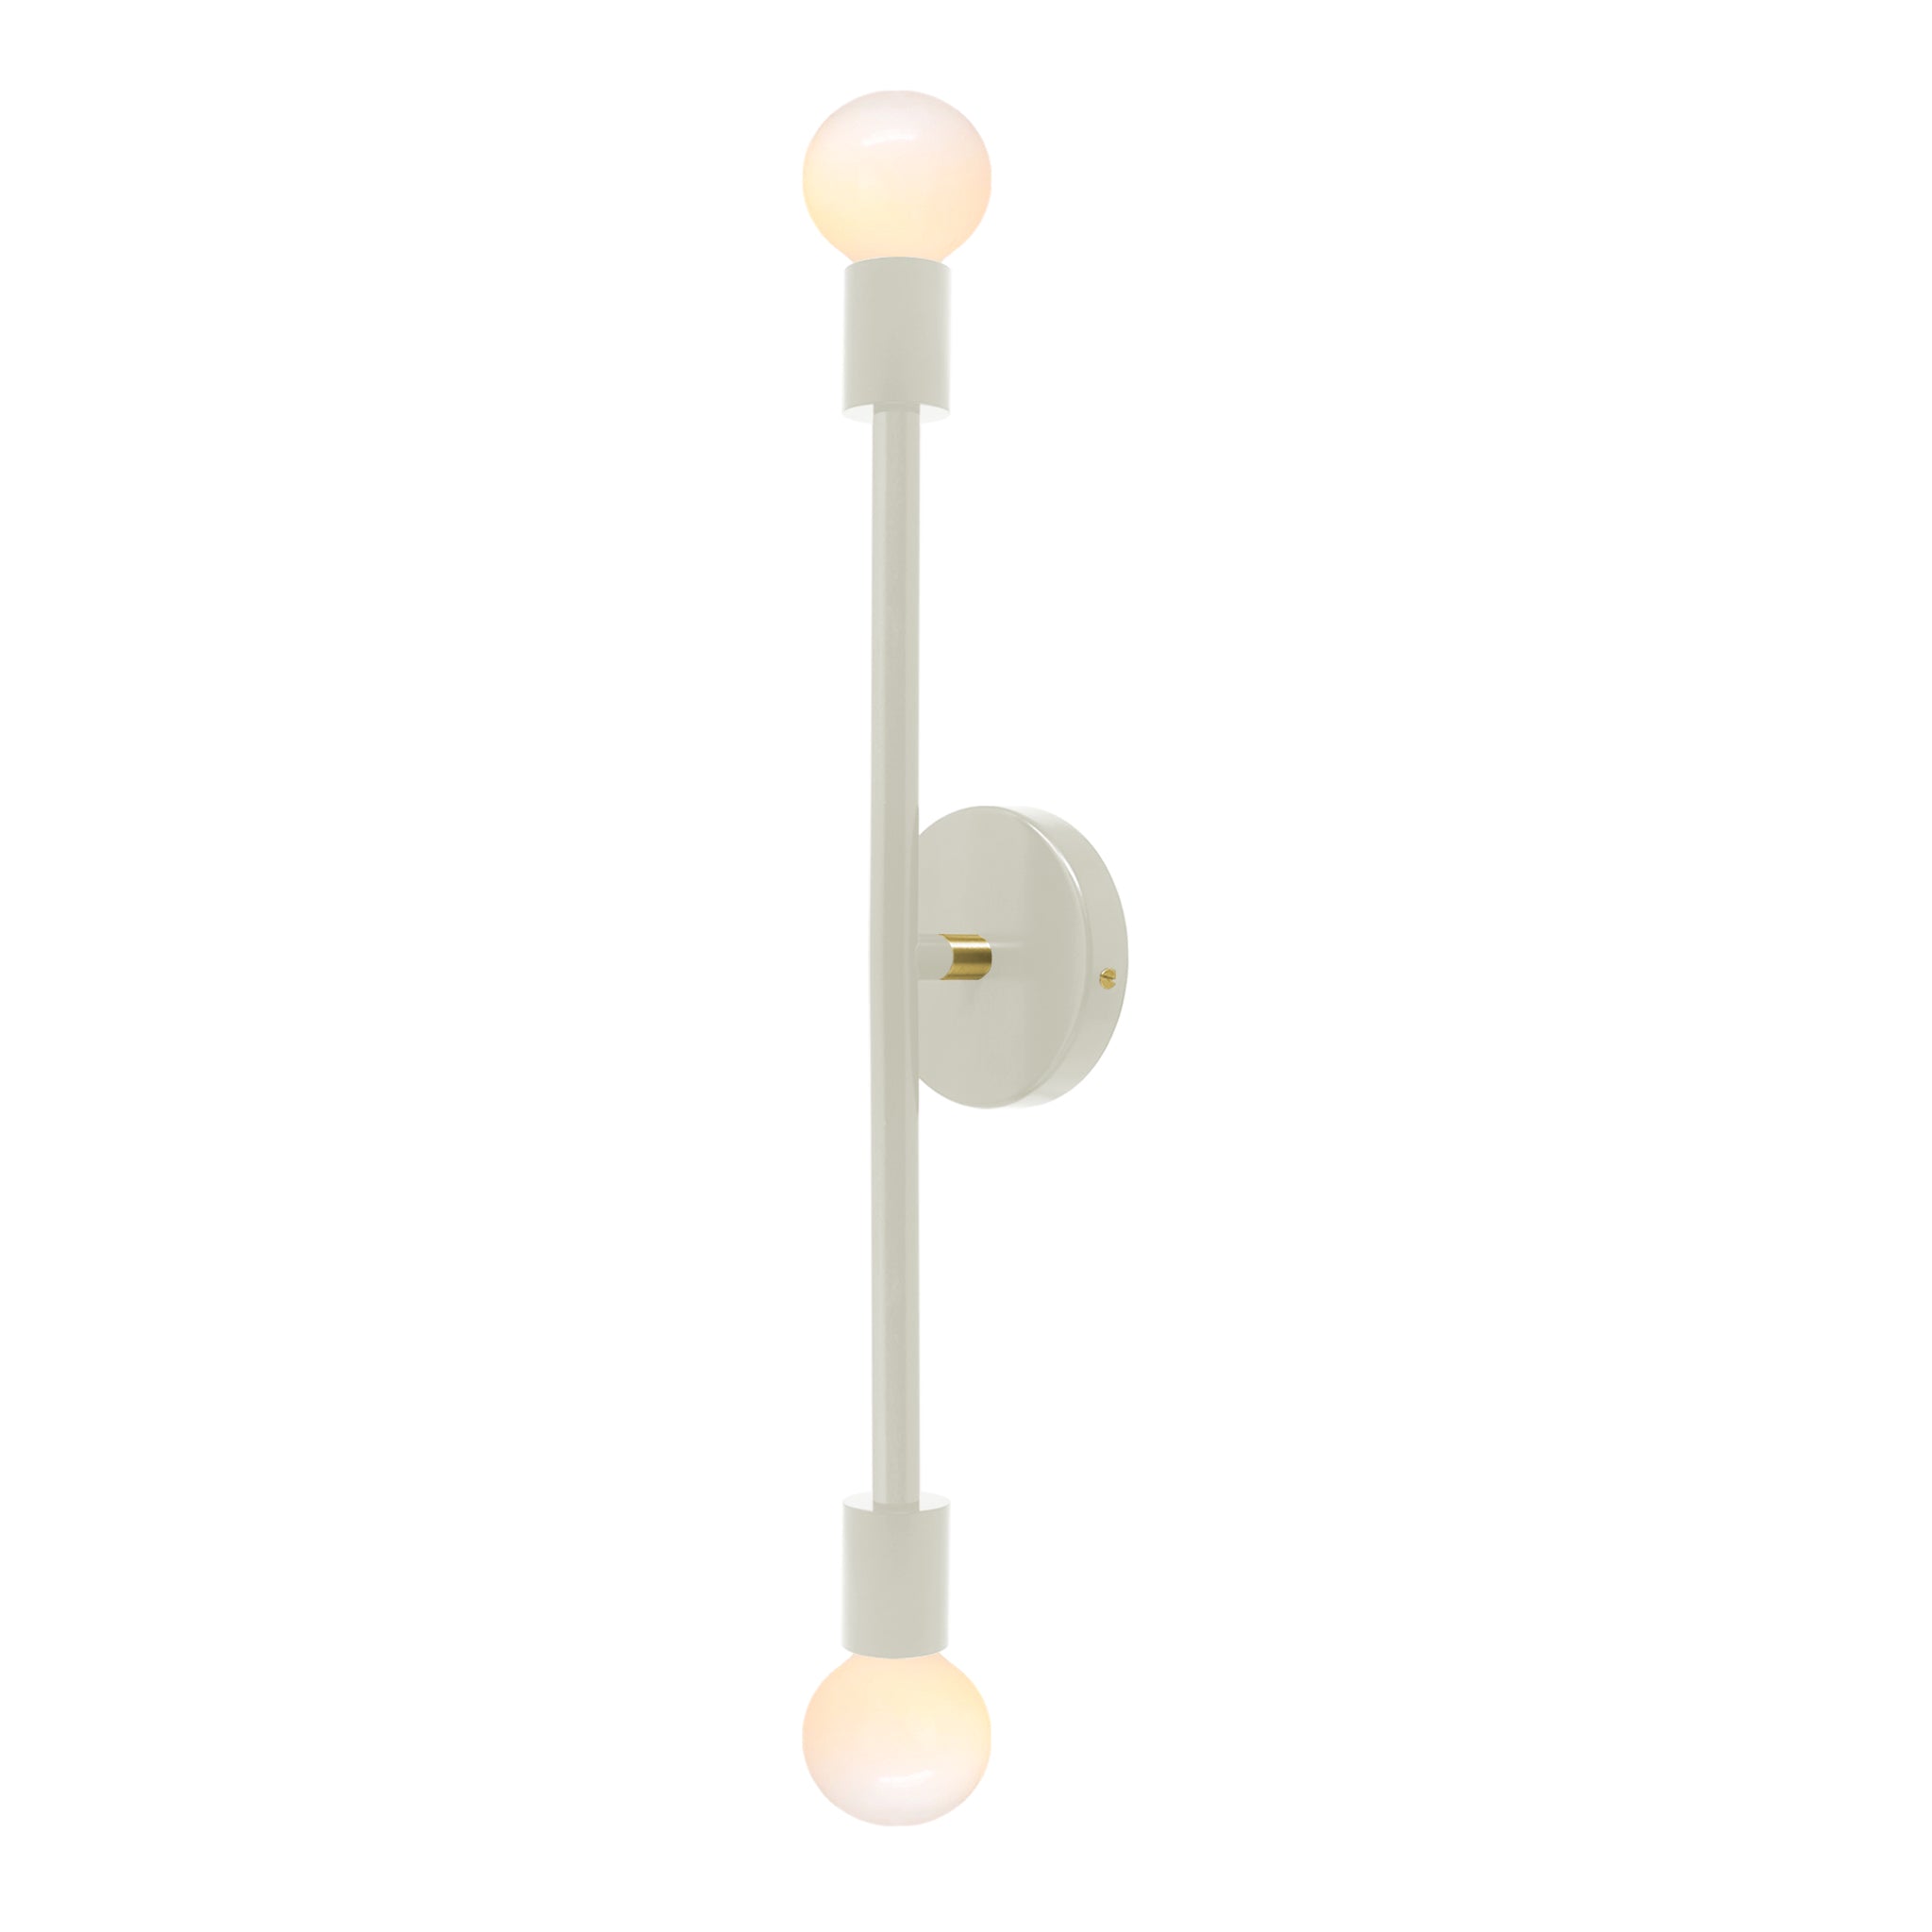 Brass and bone color Pilot sconce 23" Dutton Brown lighting